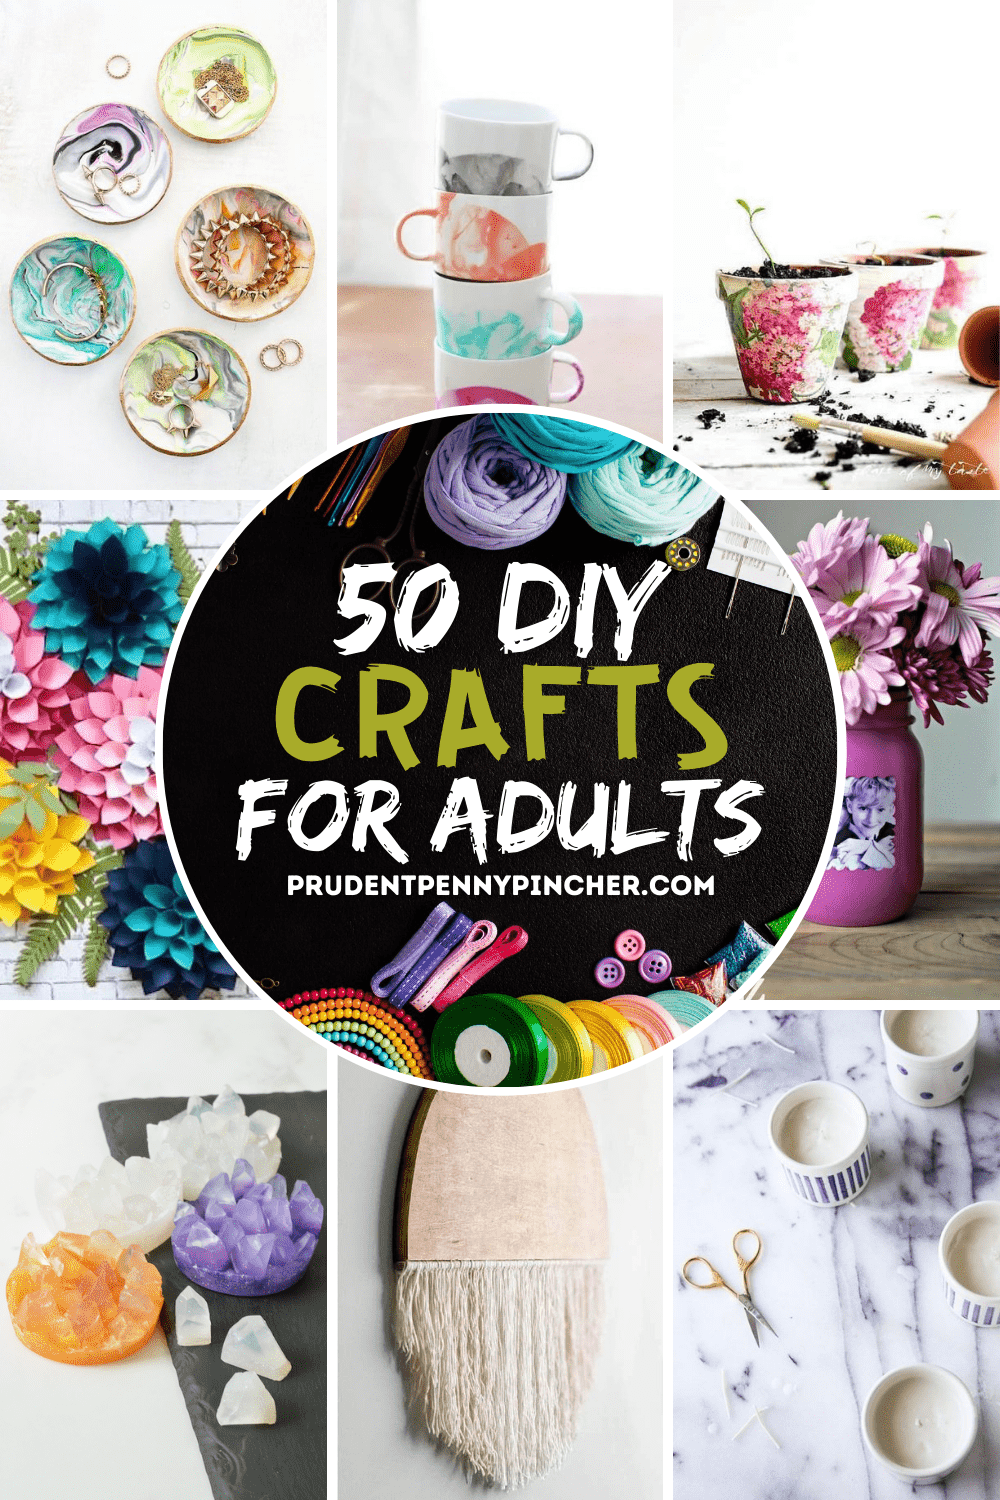 Painting for Kids: 50 Unique Ideas They'll Love - Mod Podge Rocks